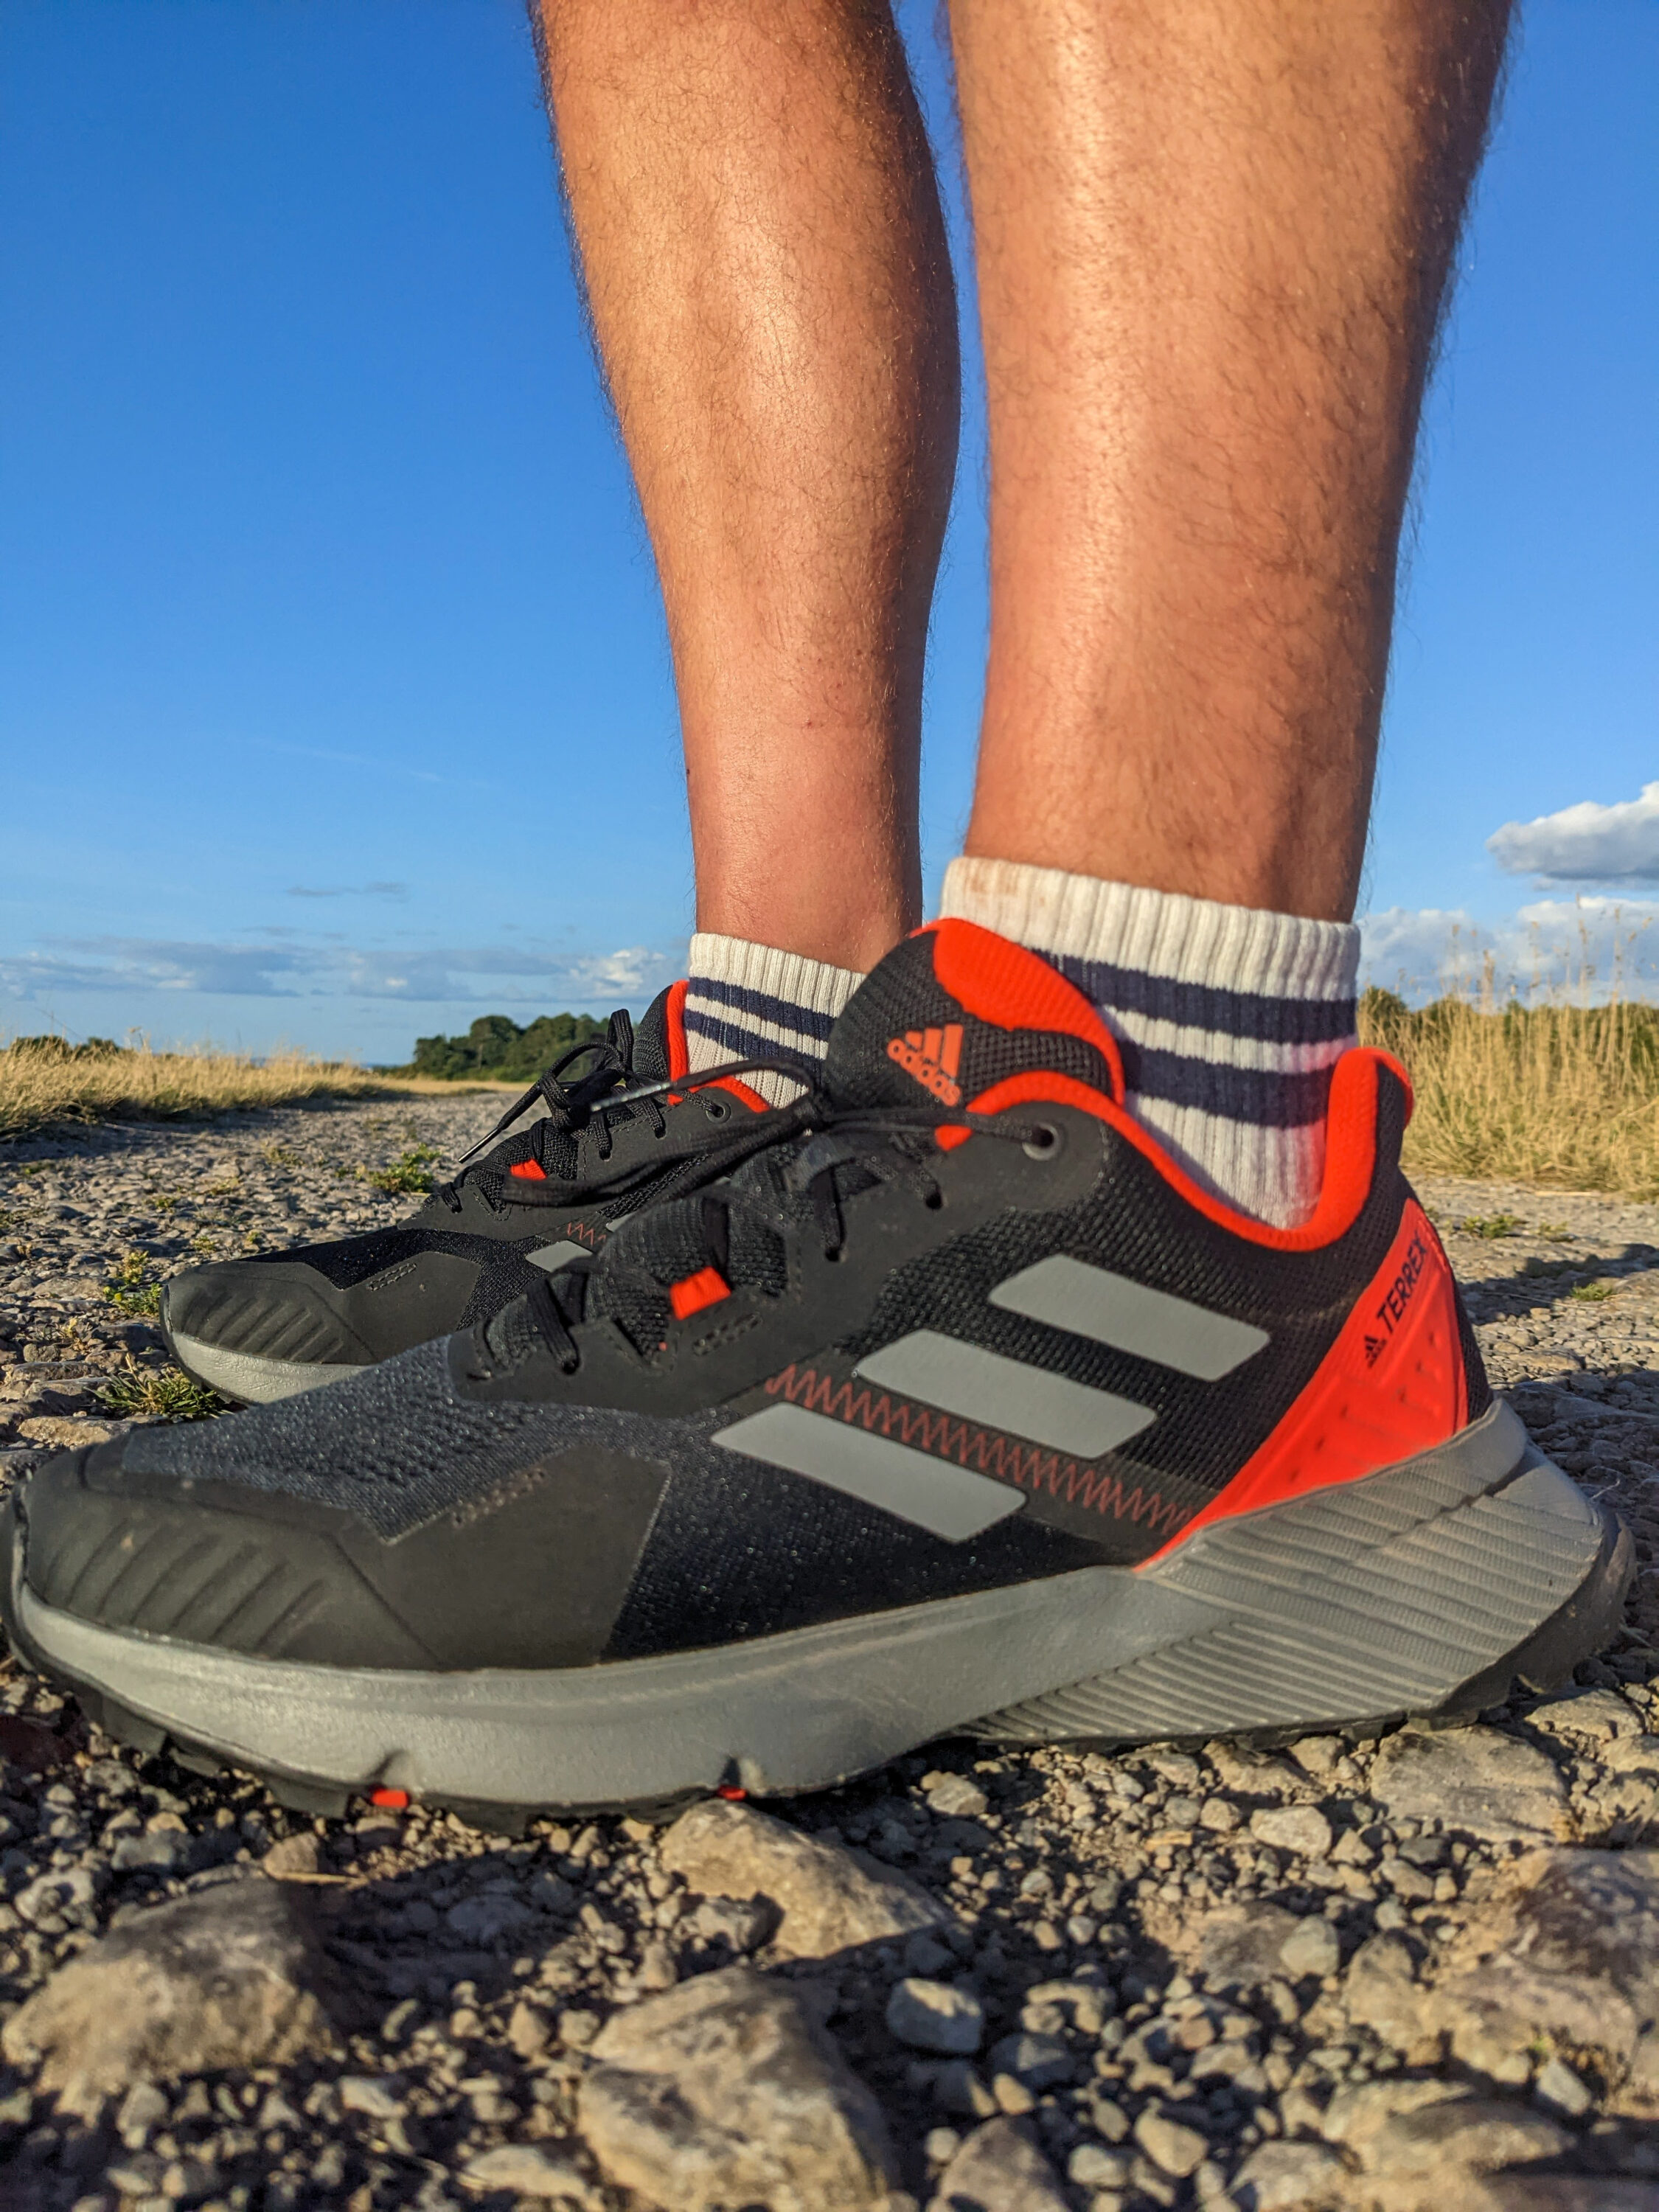 Apellido Intacto Humano Review: Adidas Terrex SoulStride trail running shoes - BASE Magazine